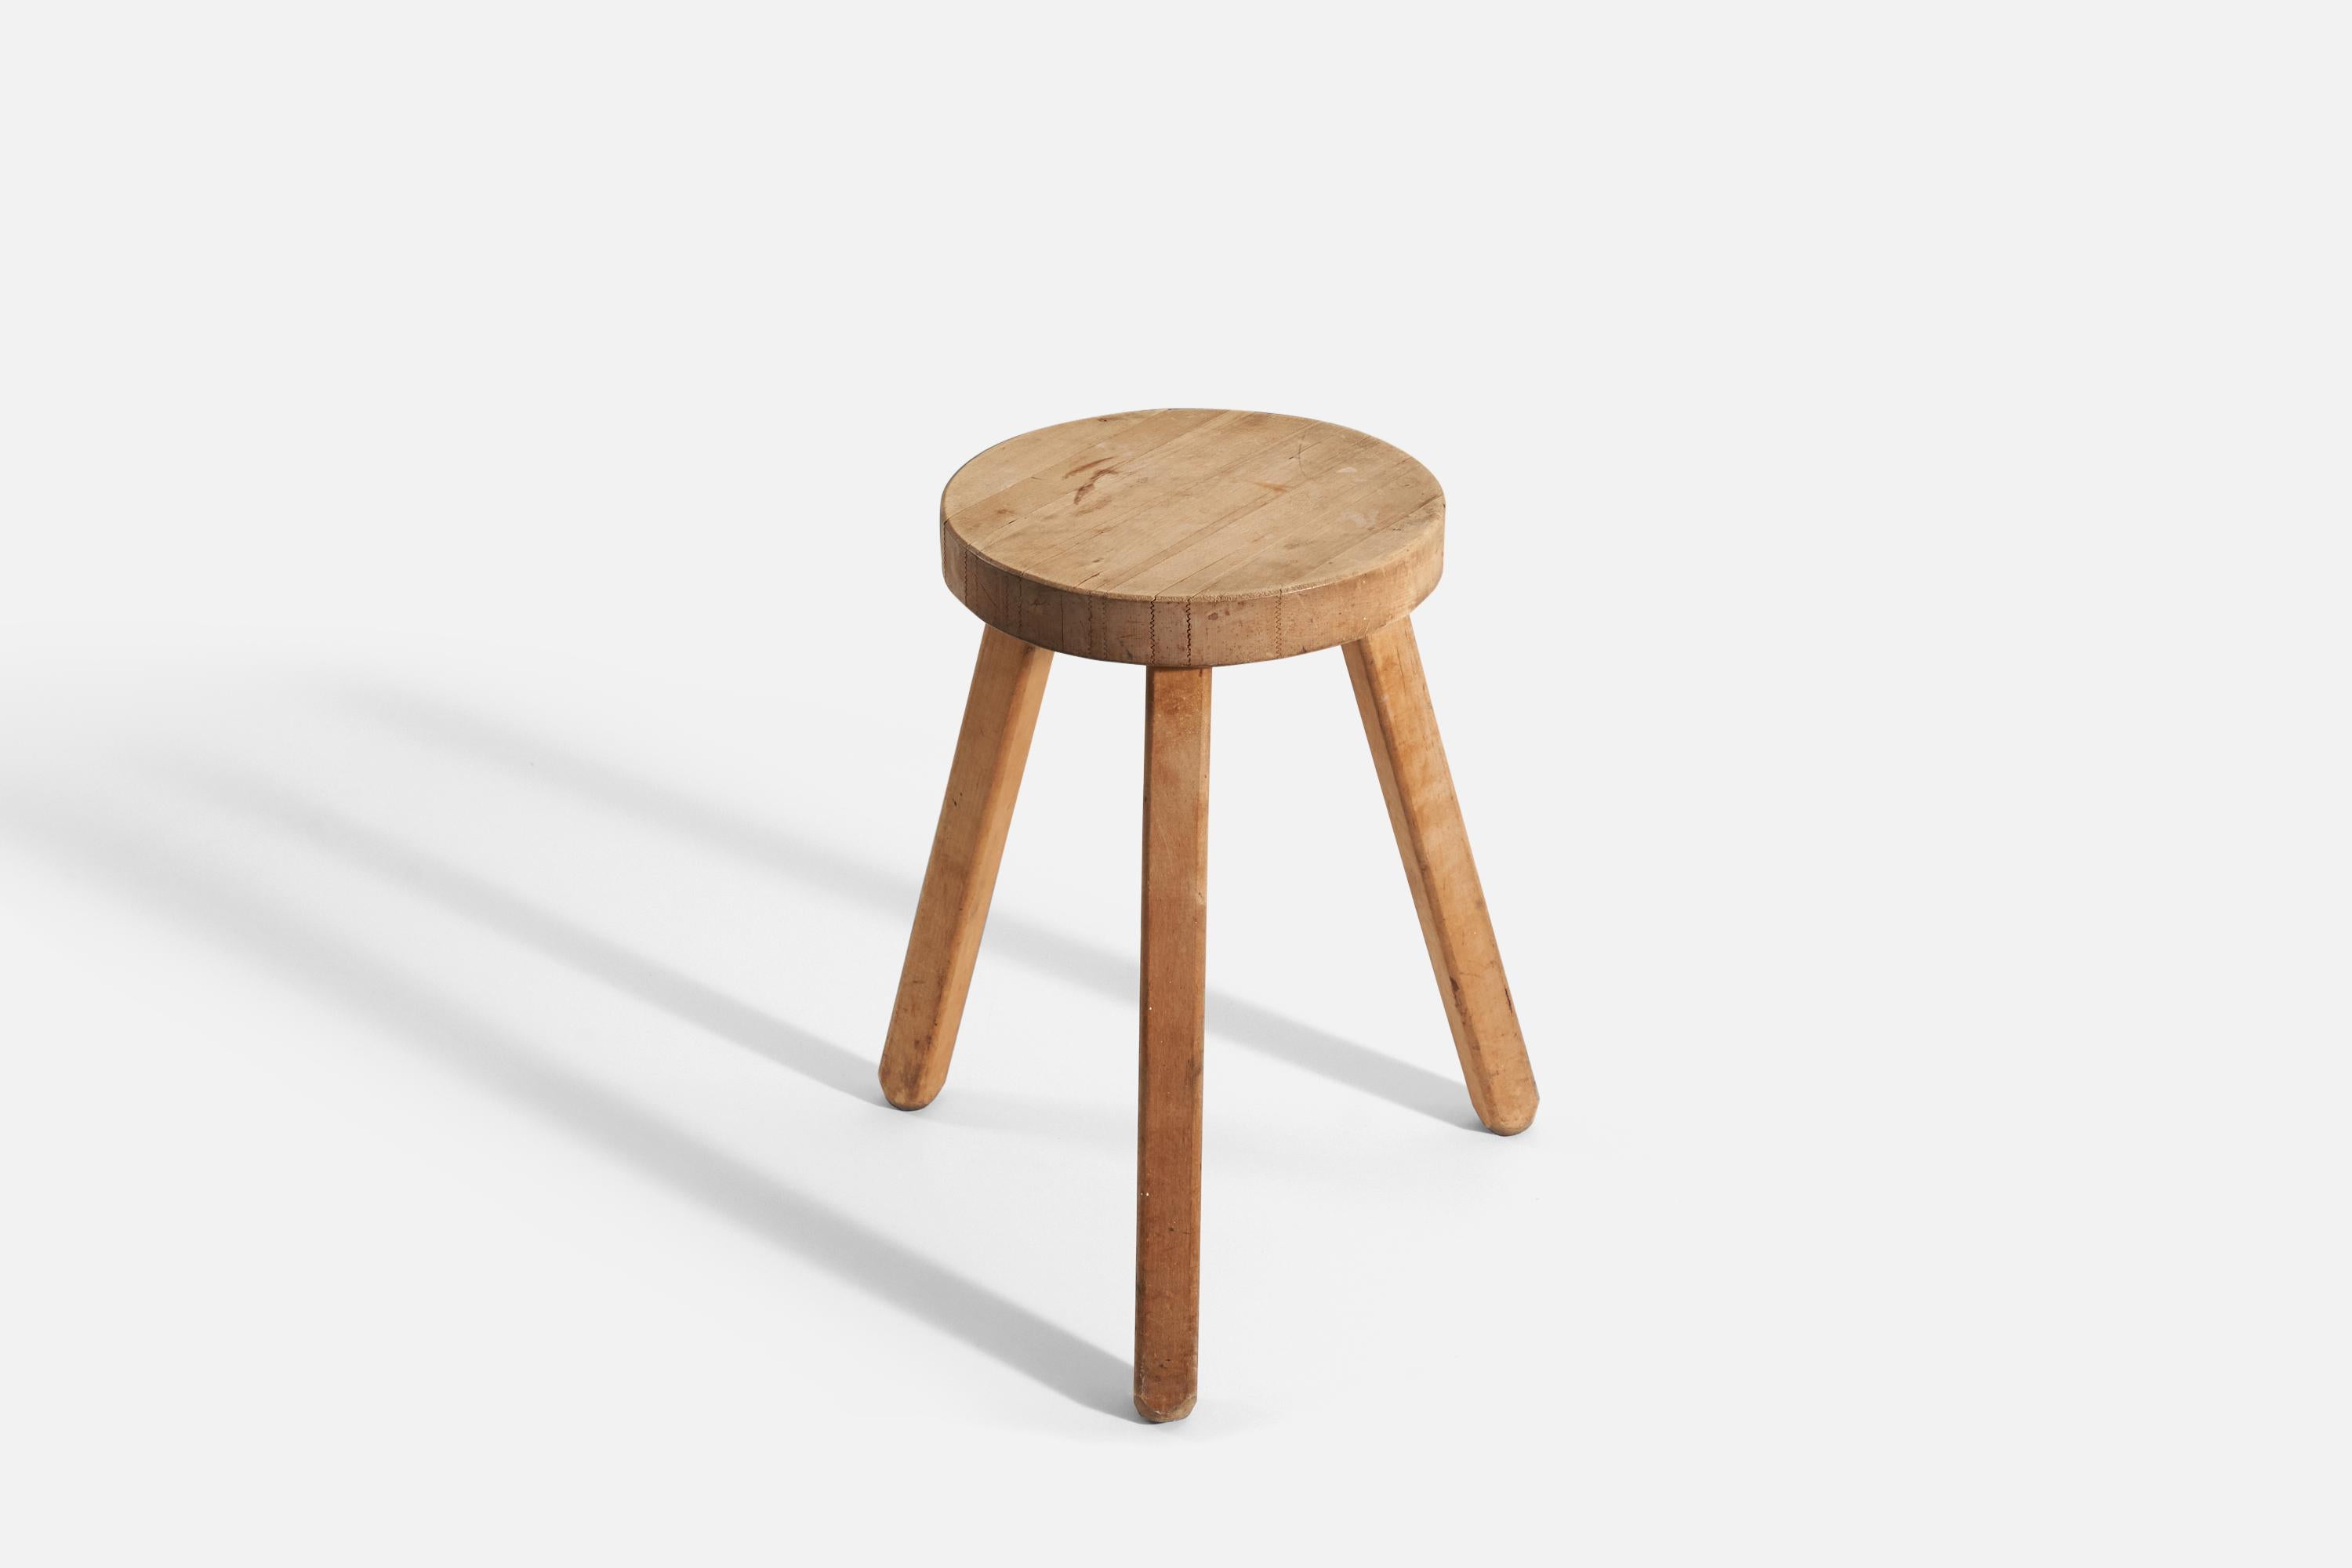 A wood stool, produced by a Swedish designer, Sweden, c. 1950s.